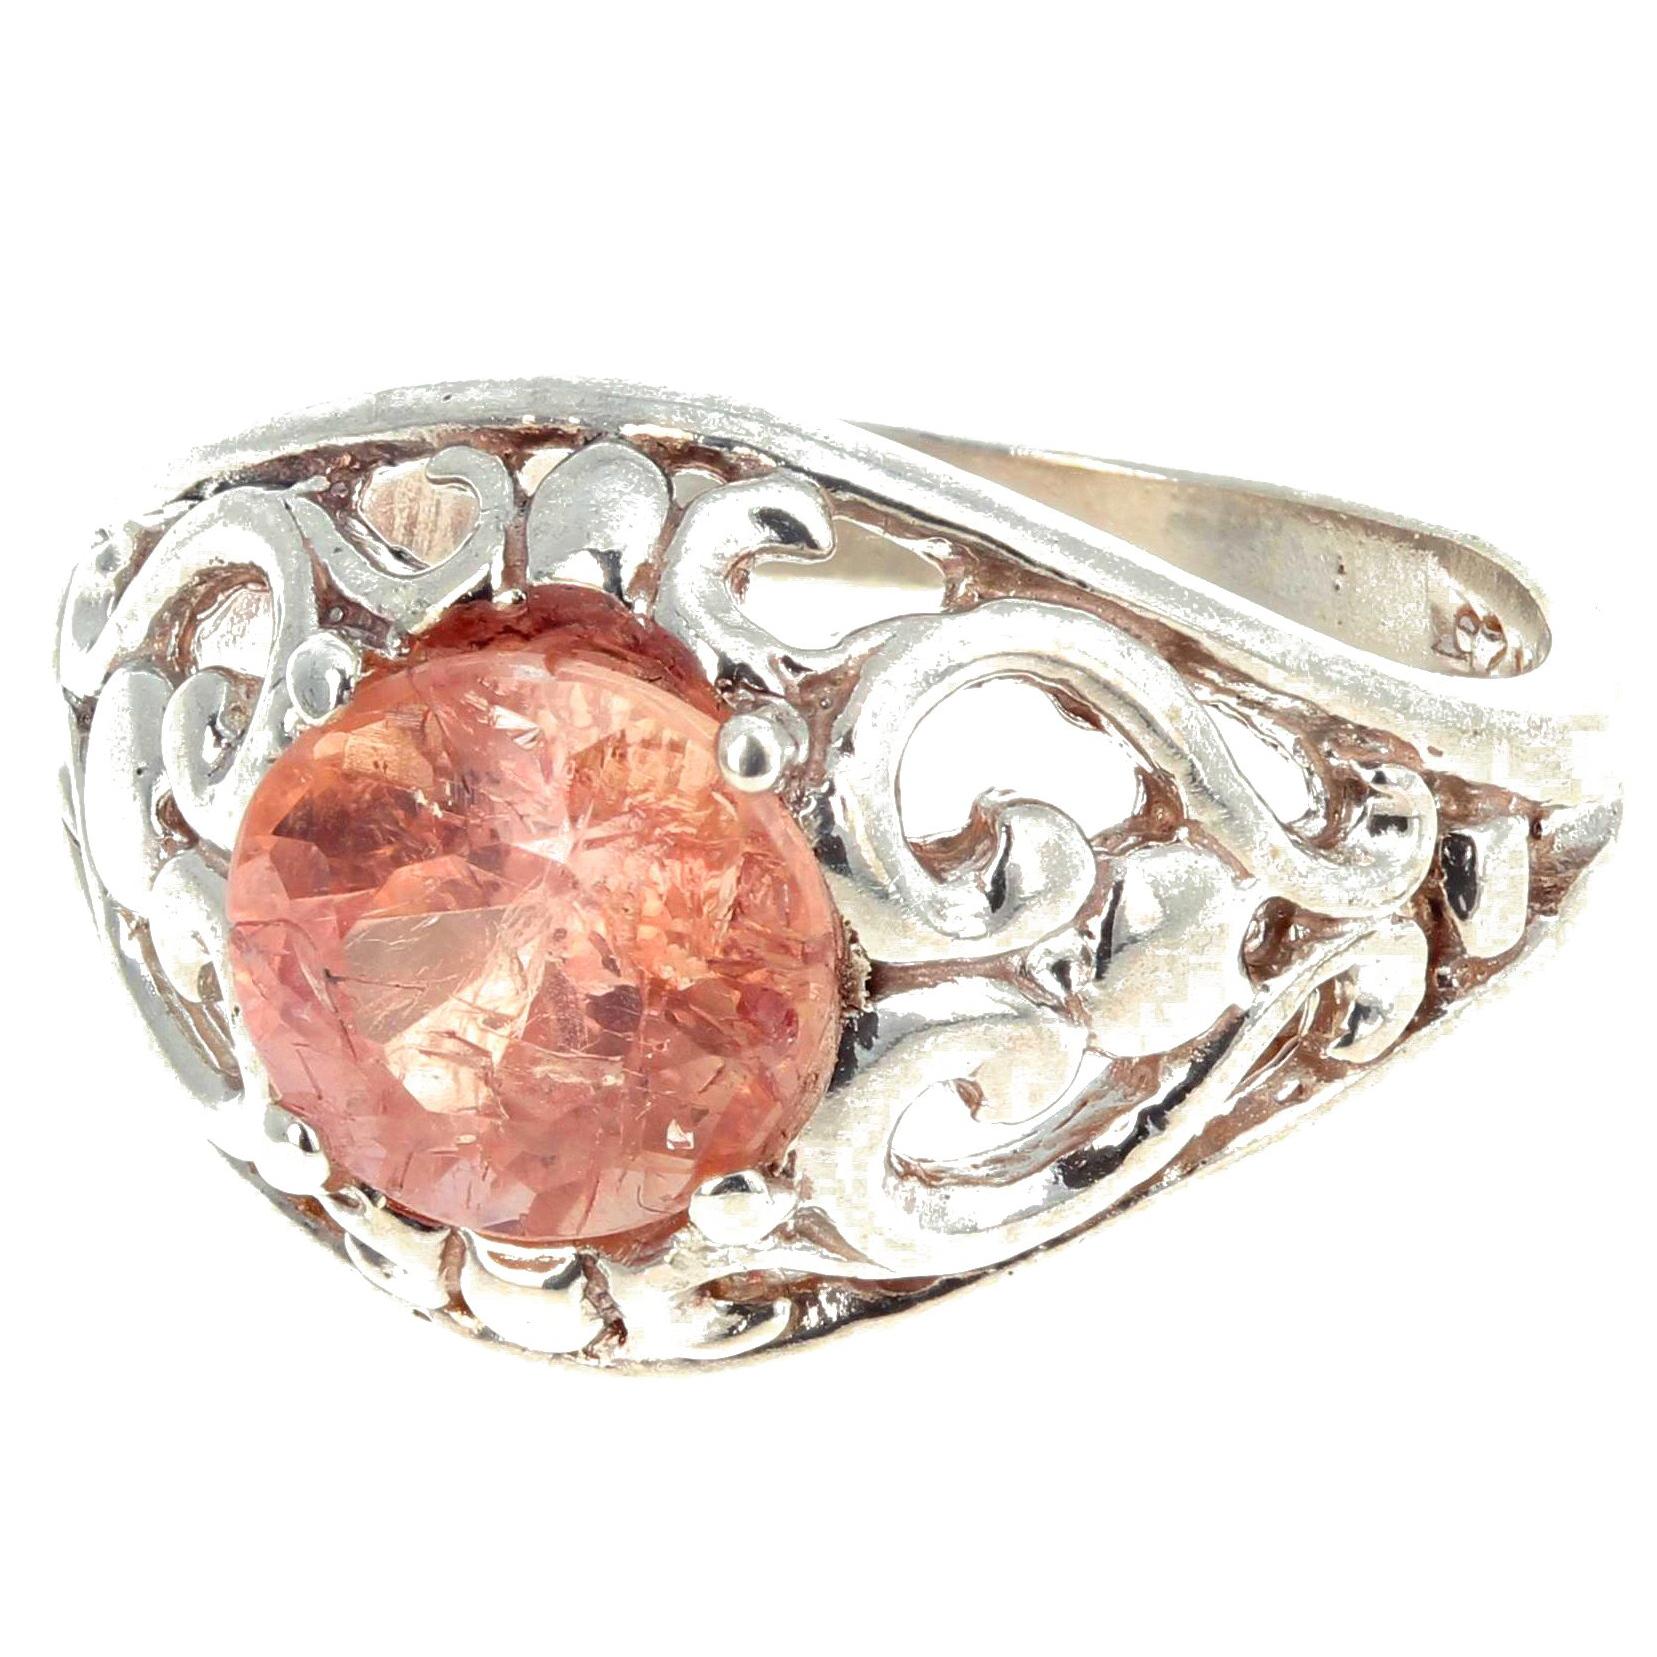 1.8 Carat Imperial Topaz Sterling Silver Ring